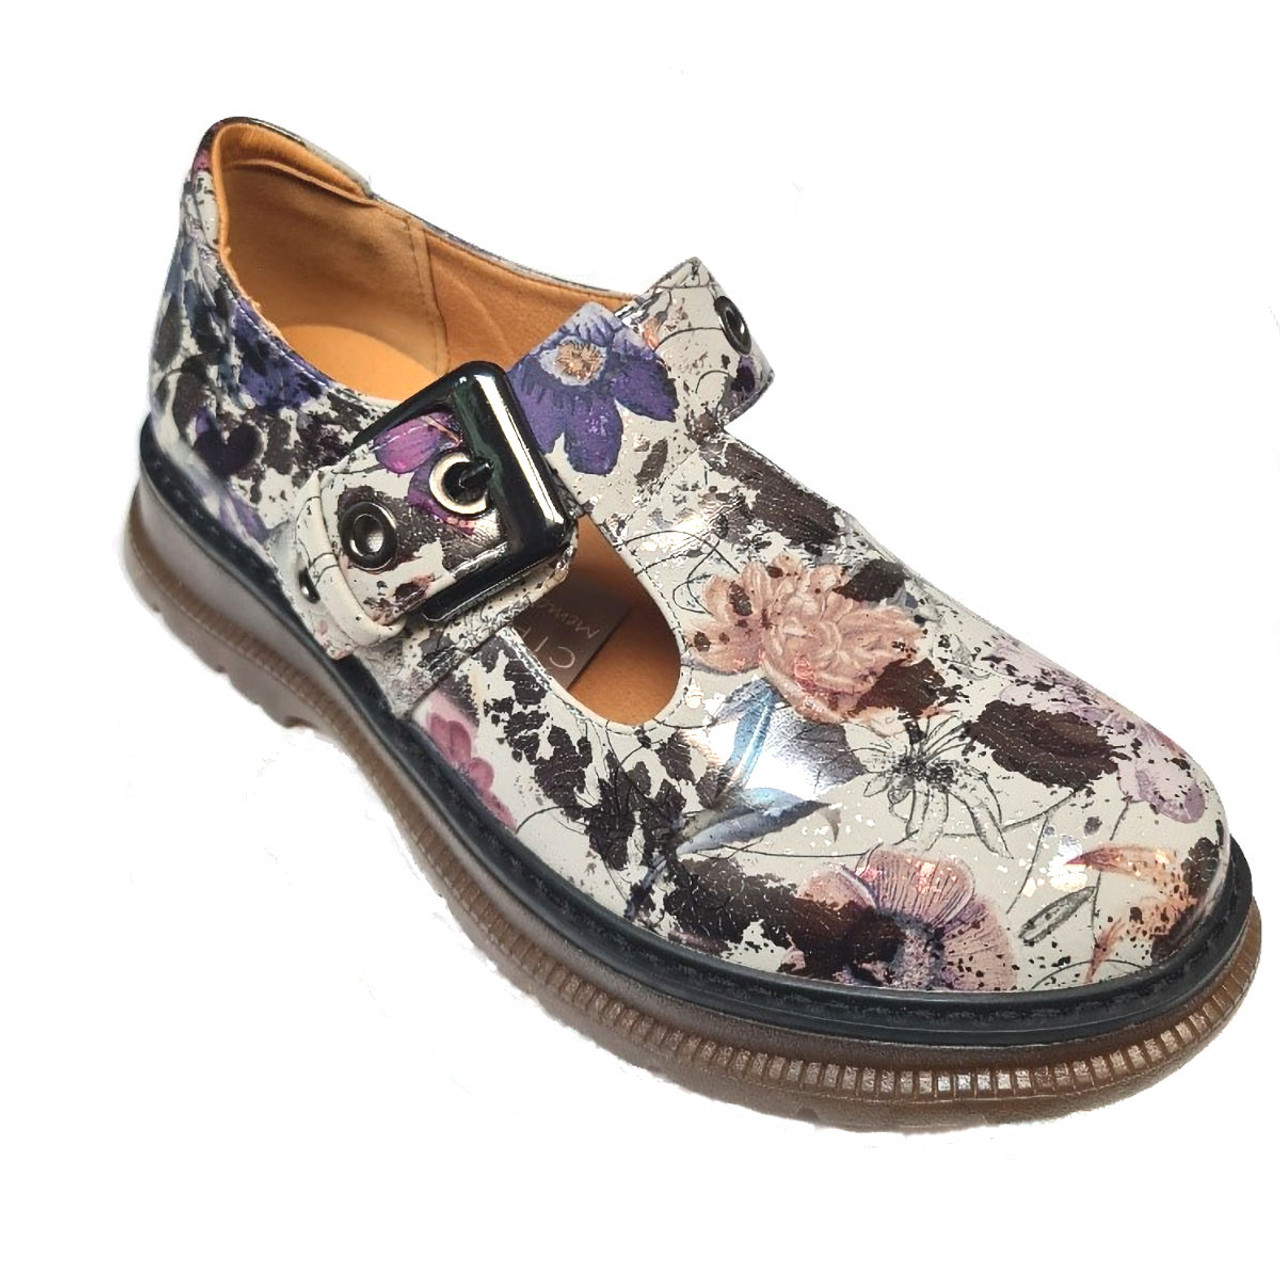 Gorgeous Grey Floral Pattern Mary Jane Shoes | Cipriata | Retro Star London